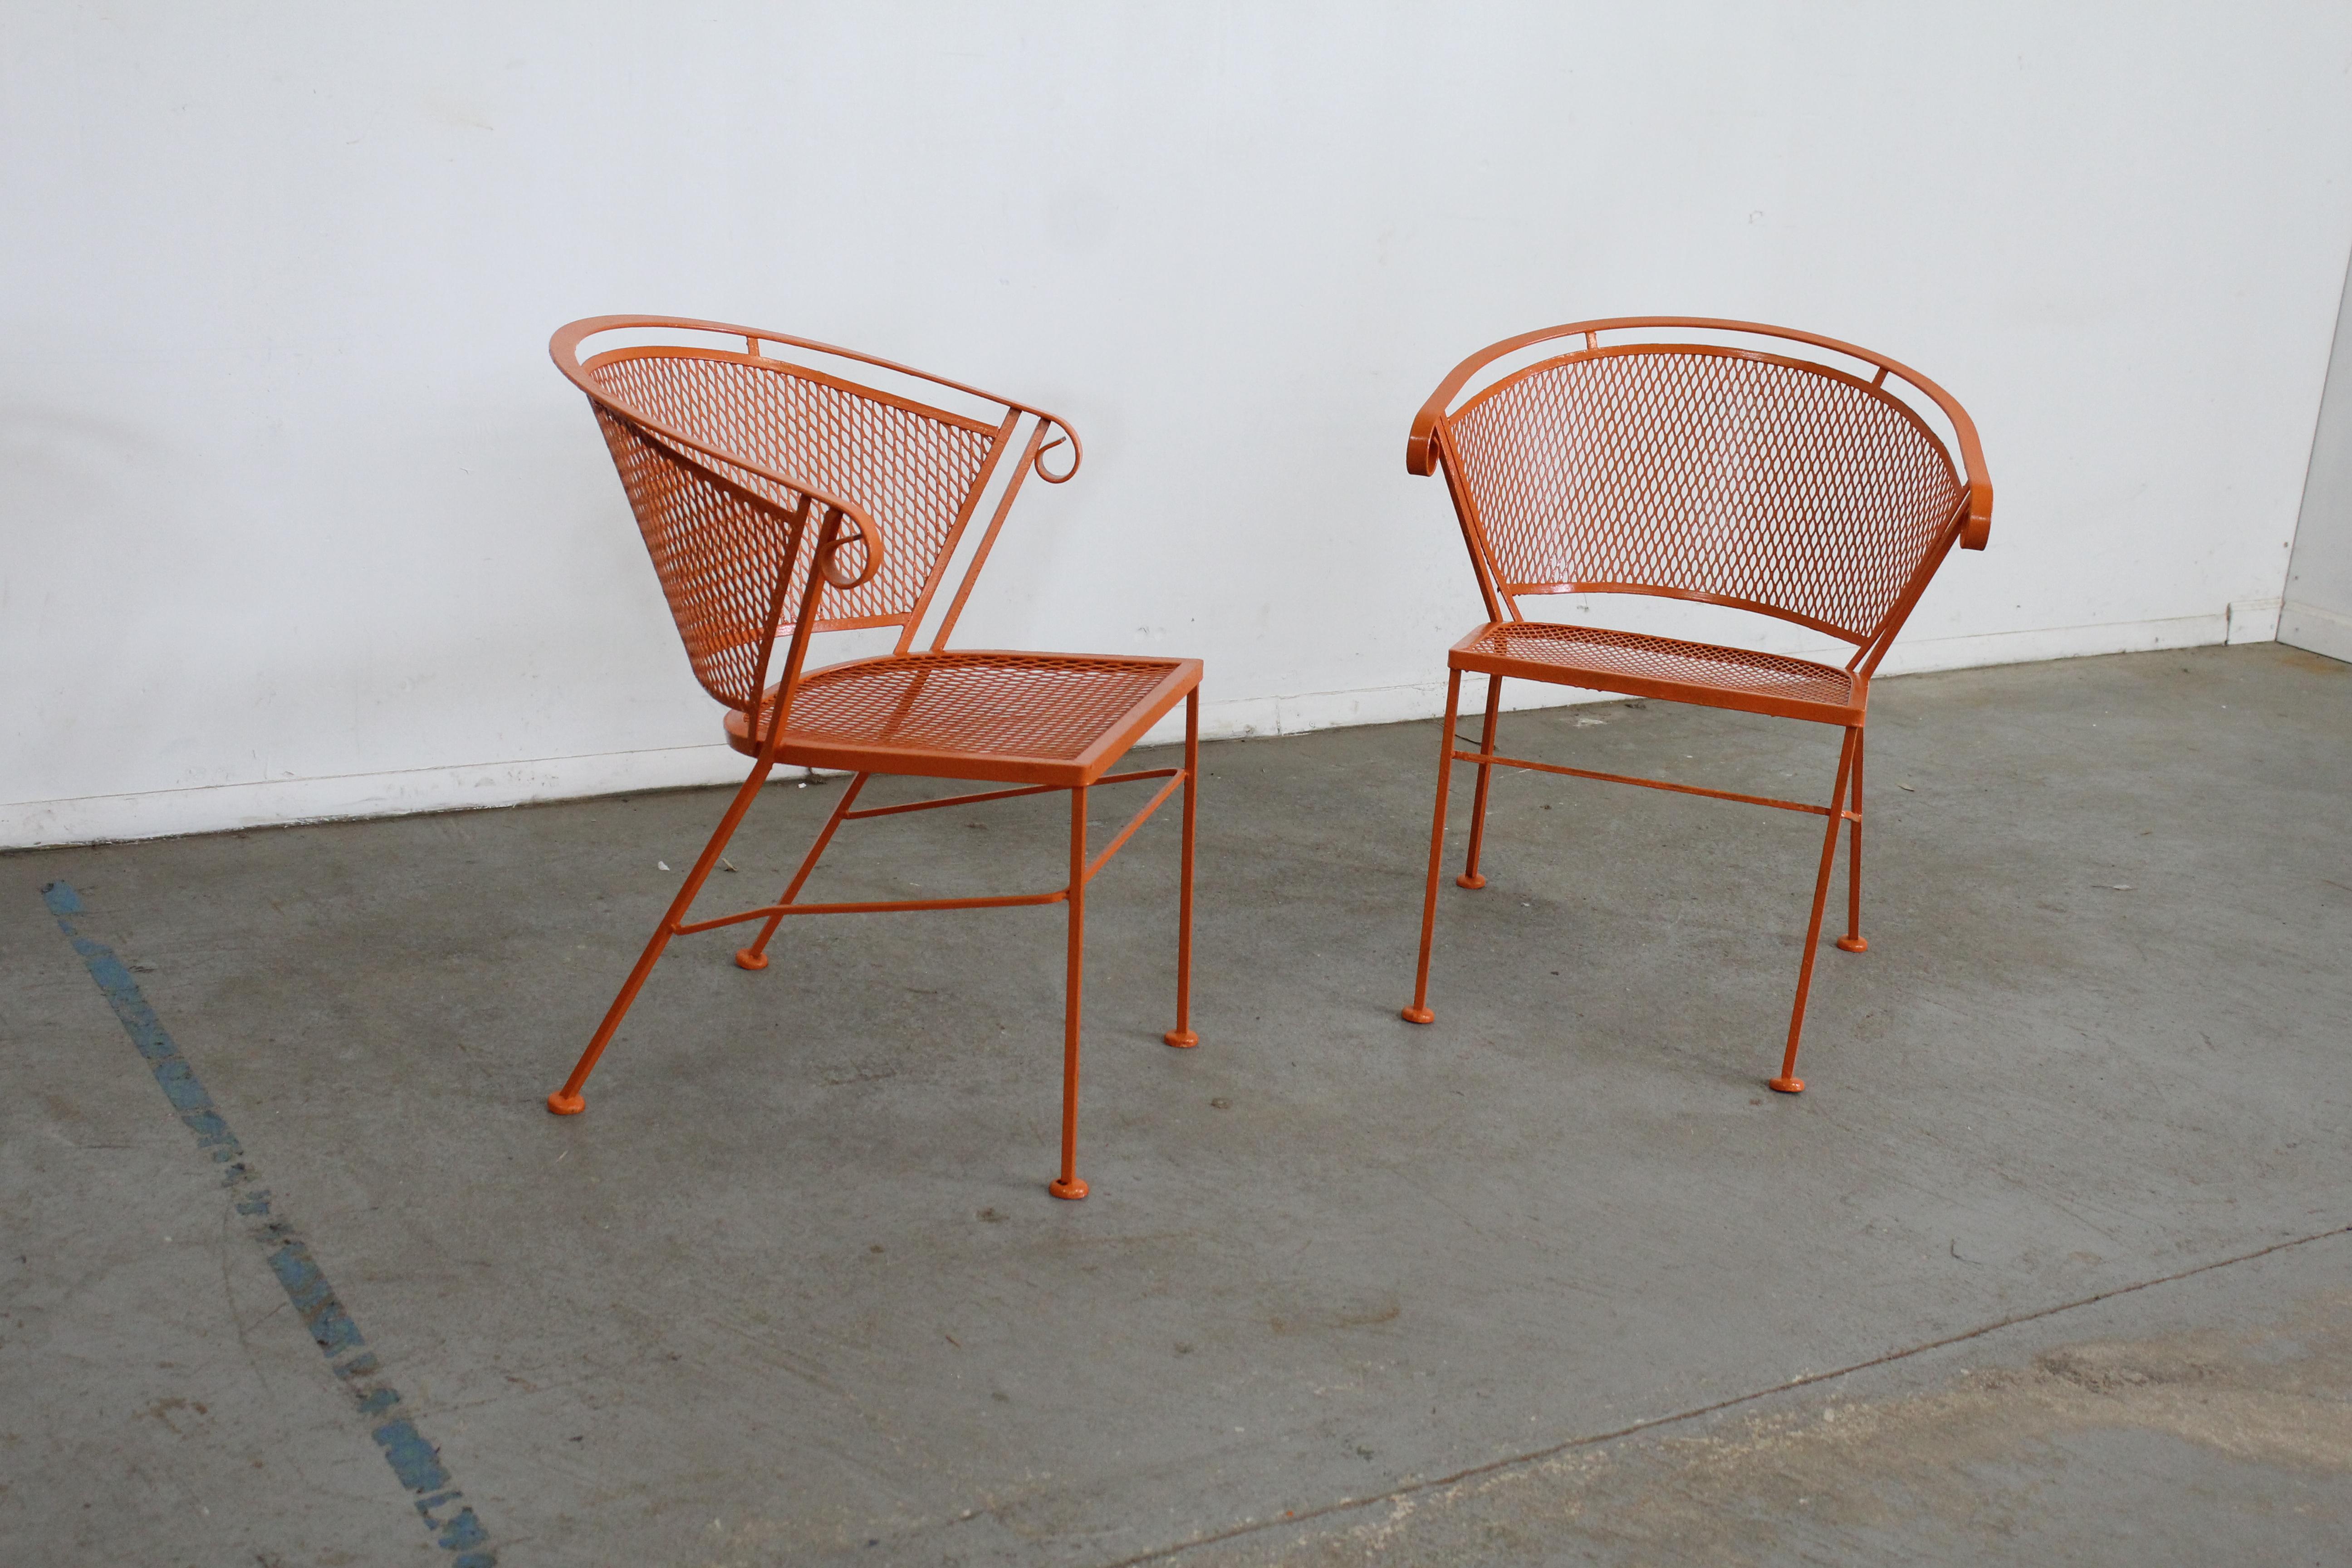 Pair of Mid-Century Modern Atomic orange outdoor metal curved back chairs

Offered is a pair of Pair of Mid-Century Modern Atomic orange Outdoor Metal Curved Back chairs, circa 1968. These chairs have been repainted in an atomic orange. They're in